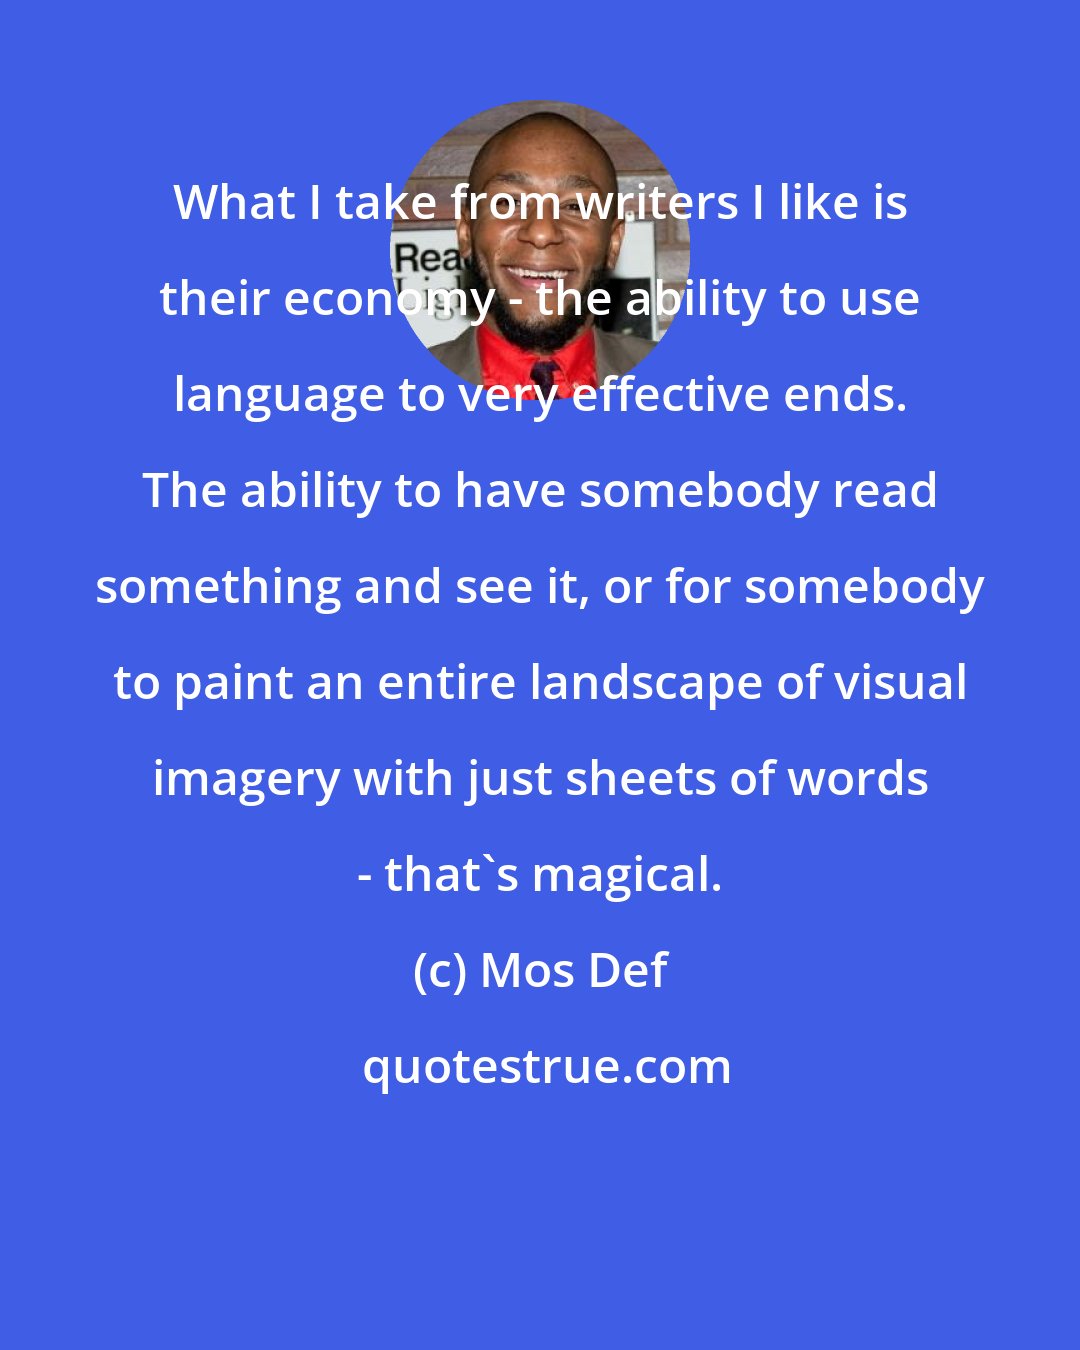 Mos Def: What I take from writers I like is their economy - the ability to use language to very effective ends. The ability to have somebody read something and see it, or for somebody to paint an entire landscape of visual imagery with just sheets of words - that's magical.